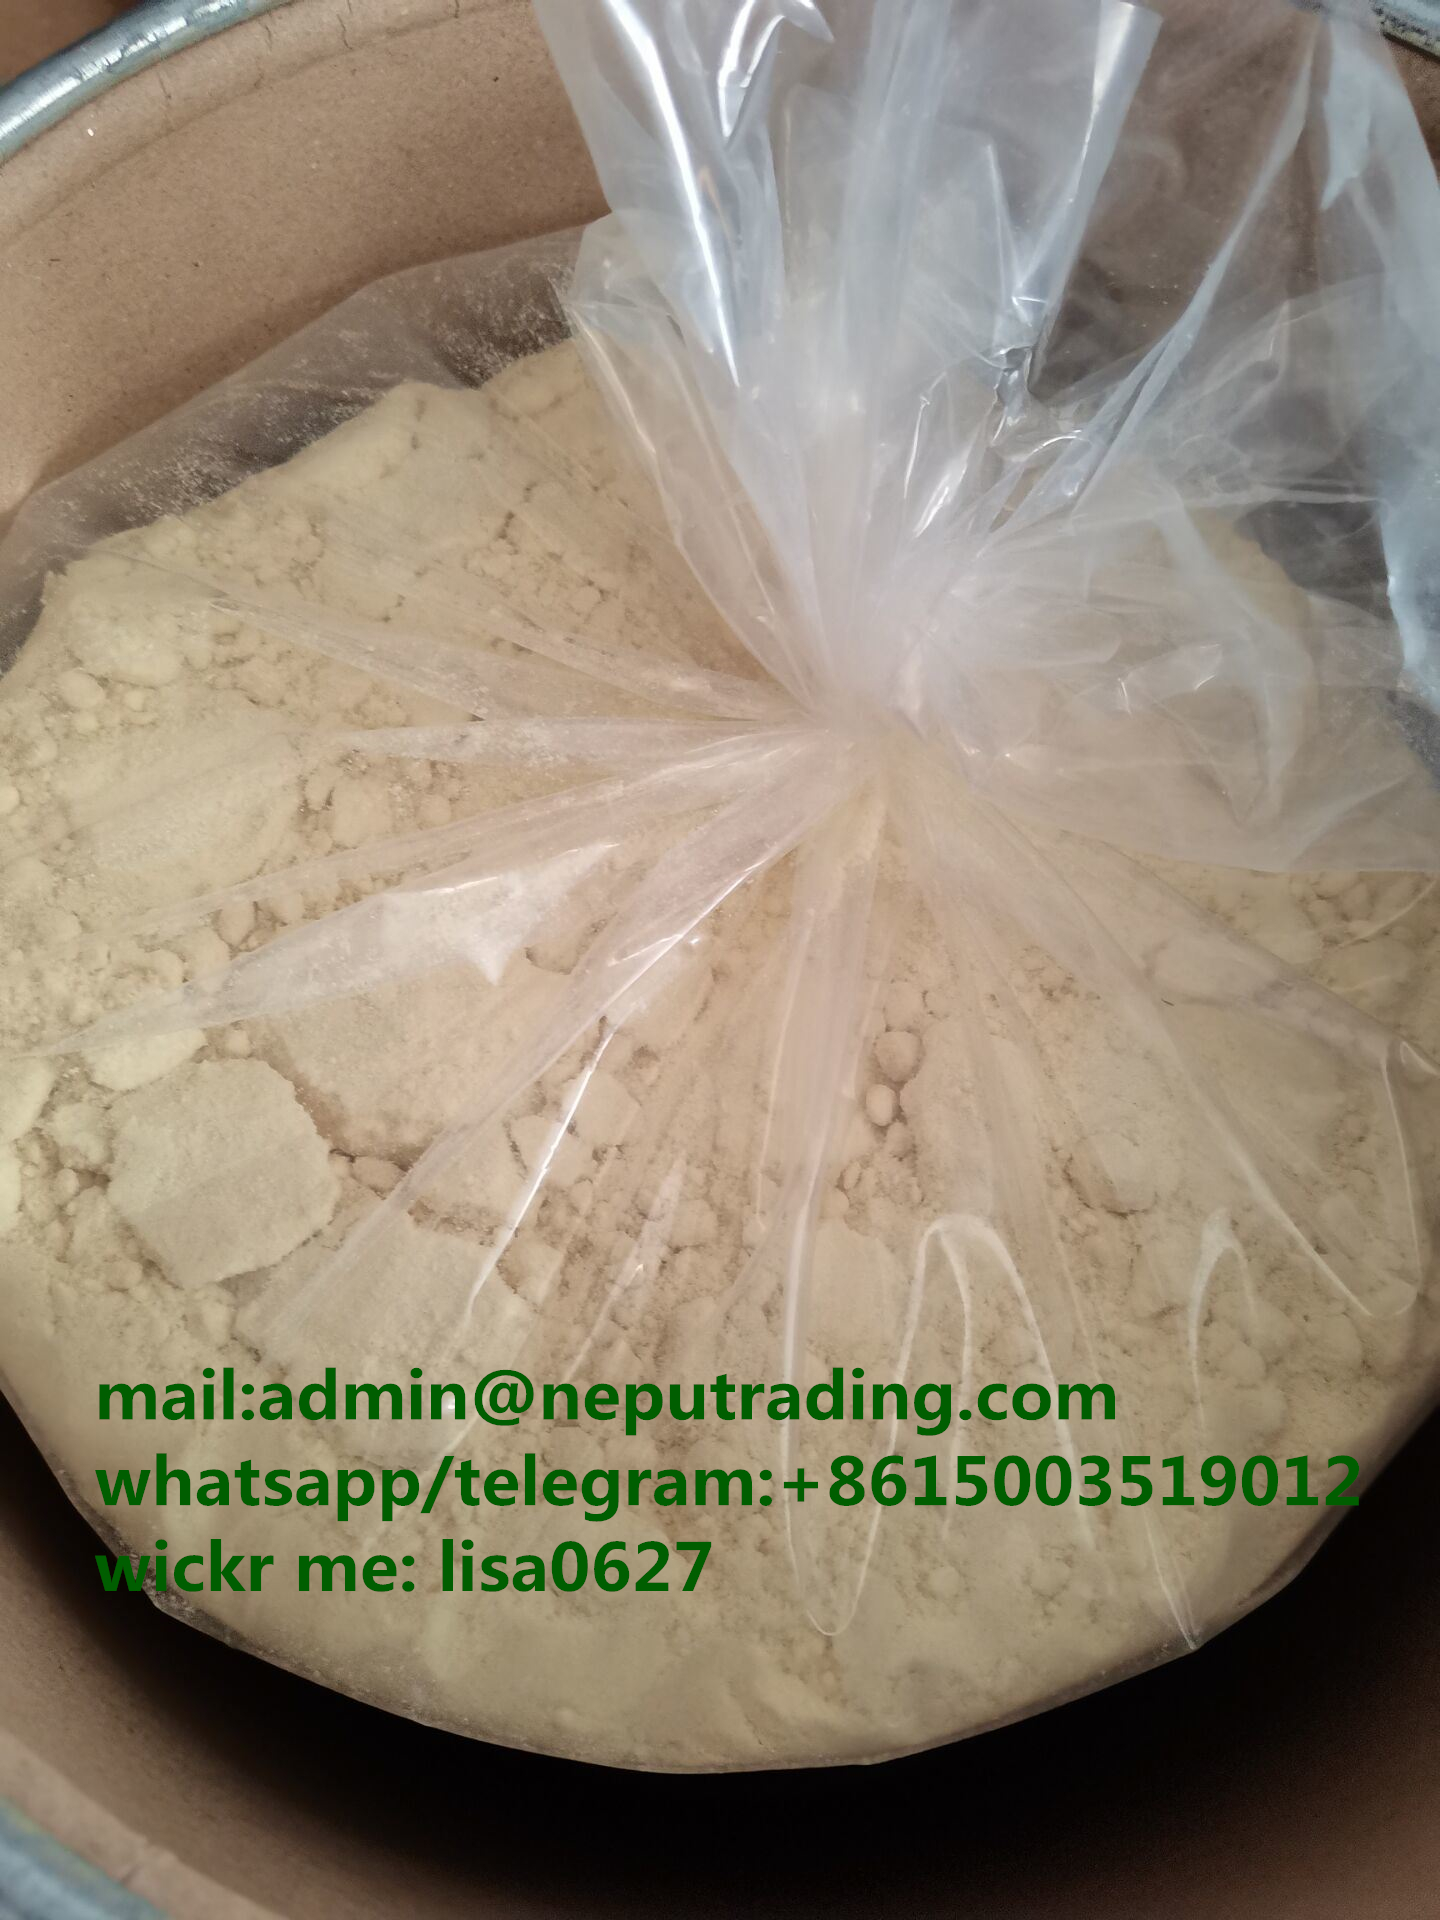 China manufacture supply 1-Boc-4-Piperidone CAS 79099-07-3 in stock